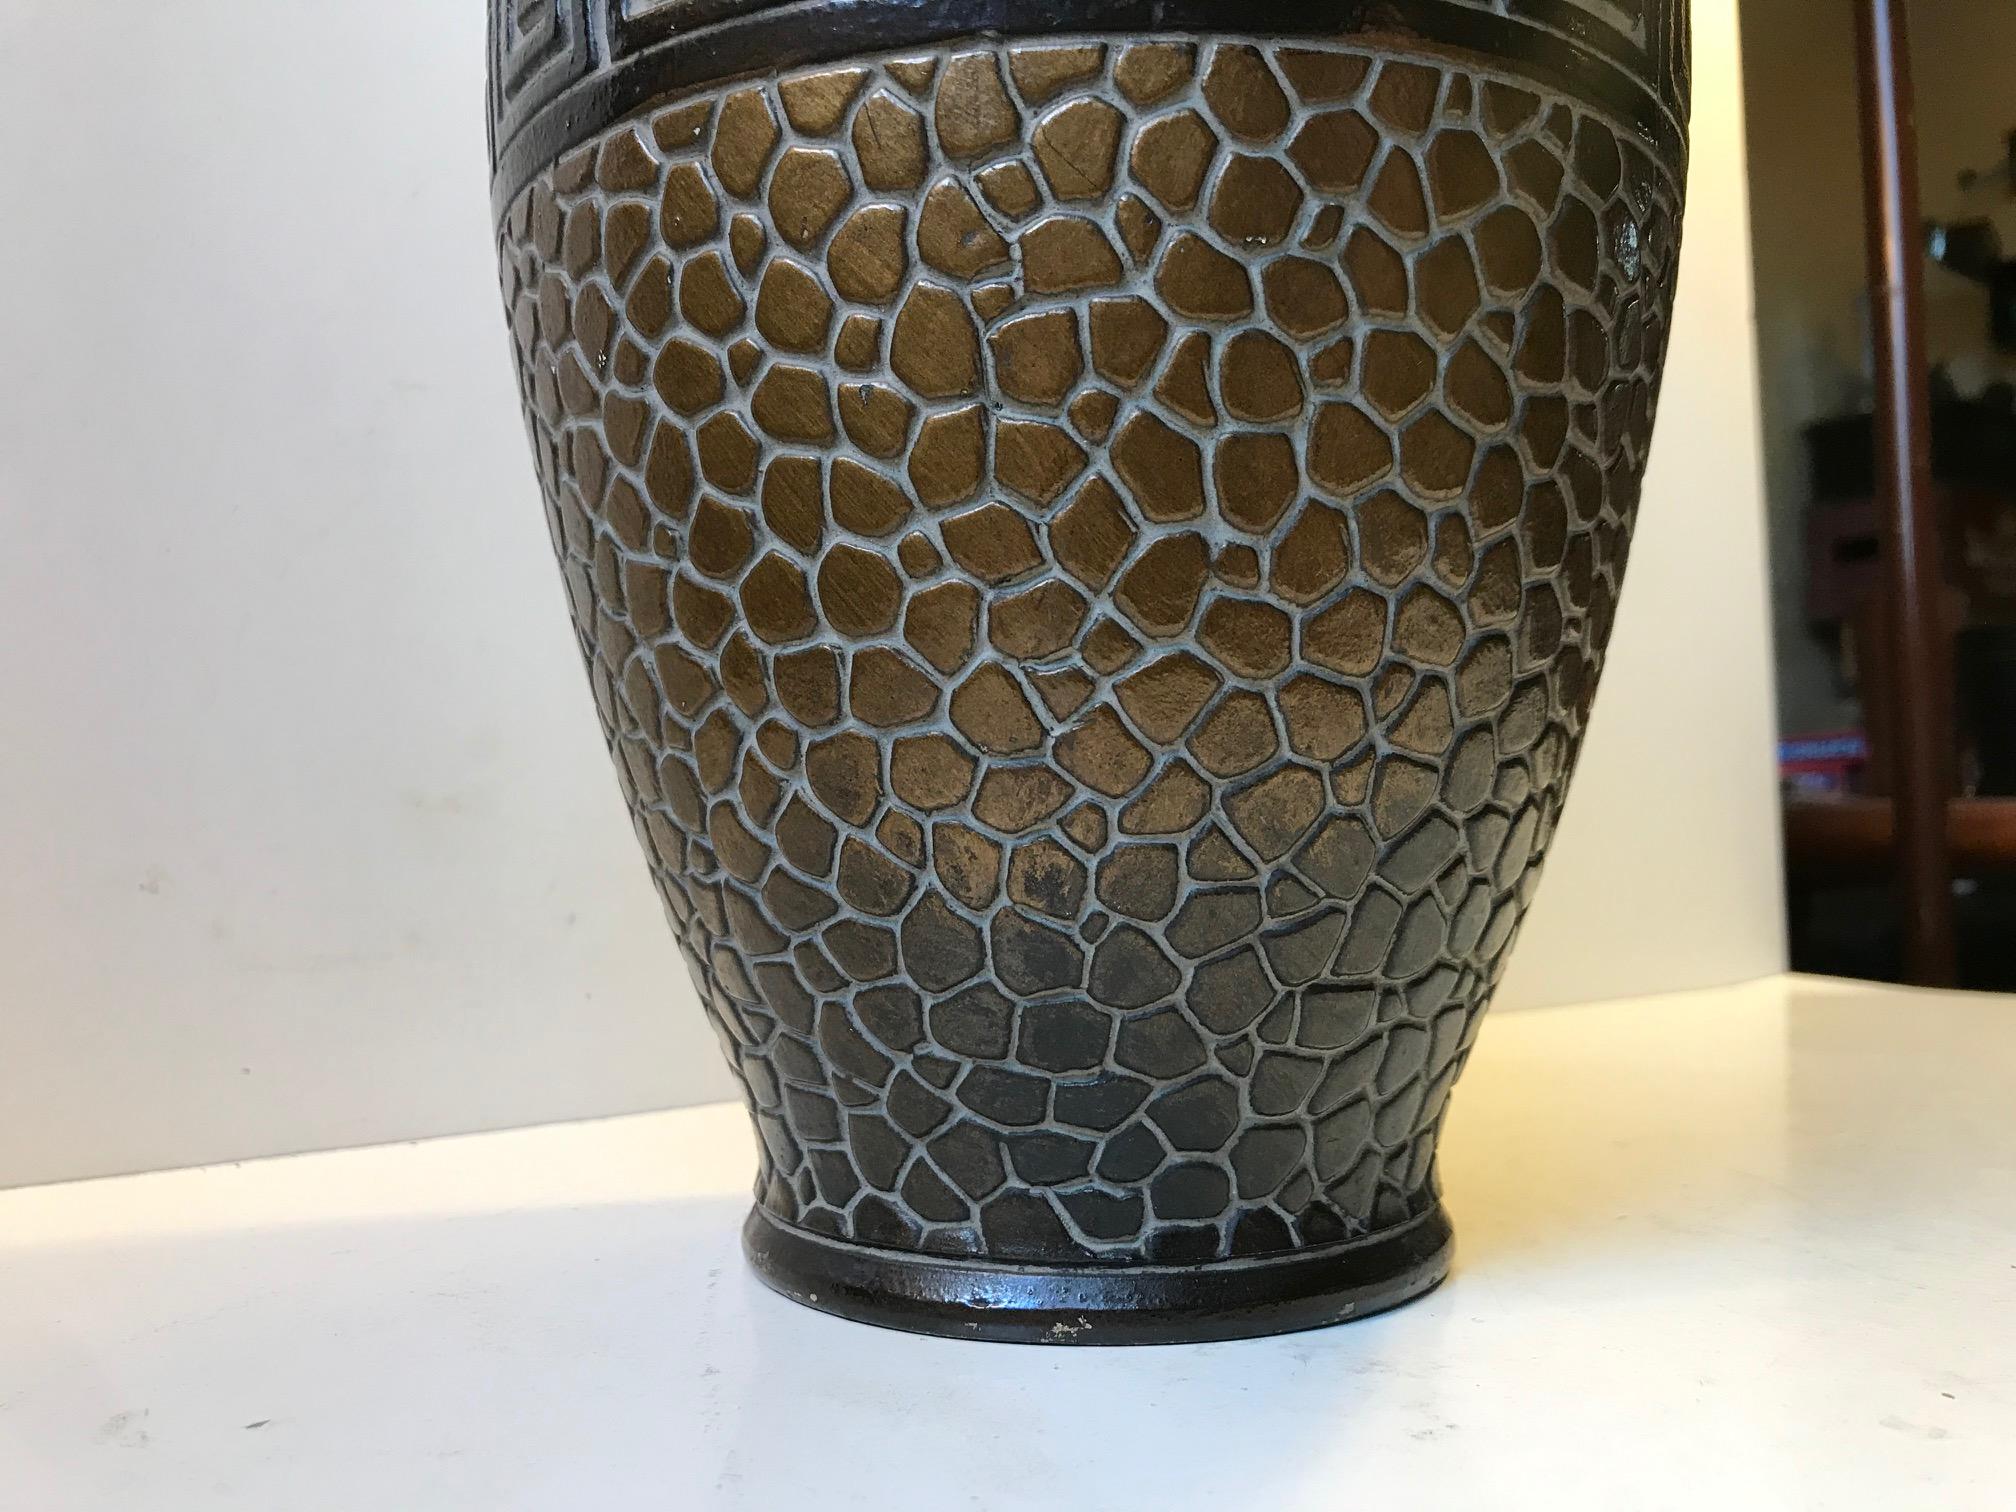 Tall and decorative German vase with great Art Deco styling. Architectural details, snake skin or tiles imita and bronze glaze. Its has an unidentified marking beneath its base.